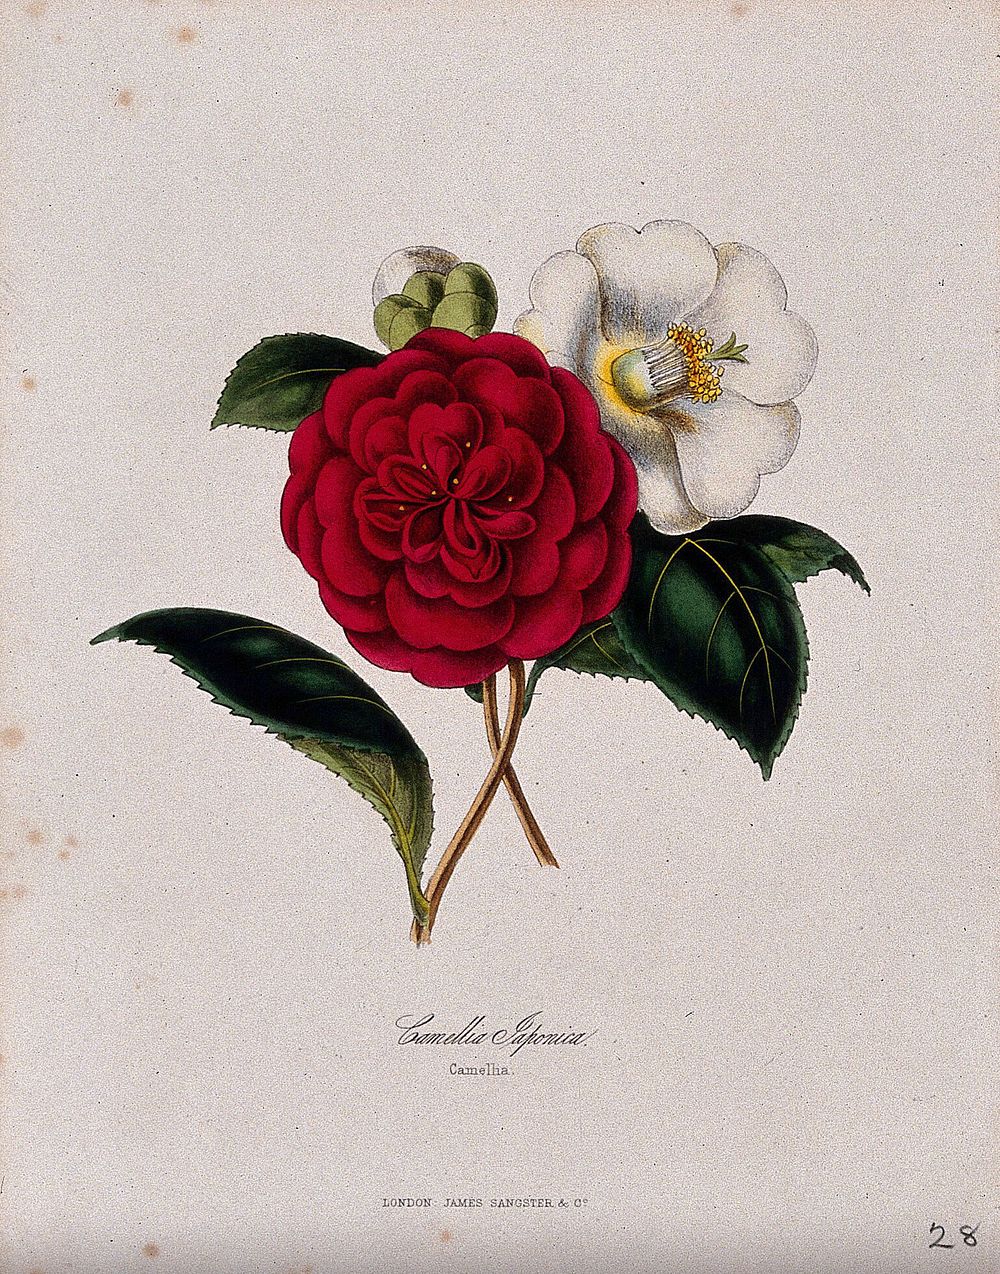 A camellia (Camellia japonica): a double red and single white flower. Coloured zincograph, c. 1853, after M. Burnett.